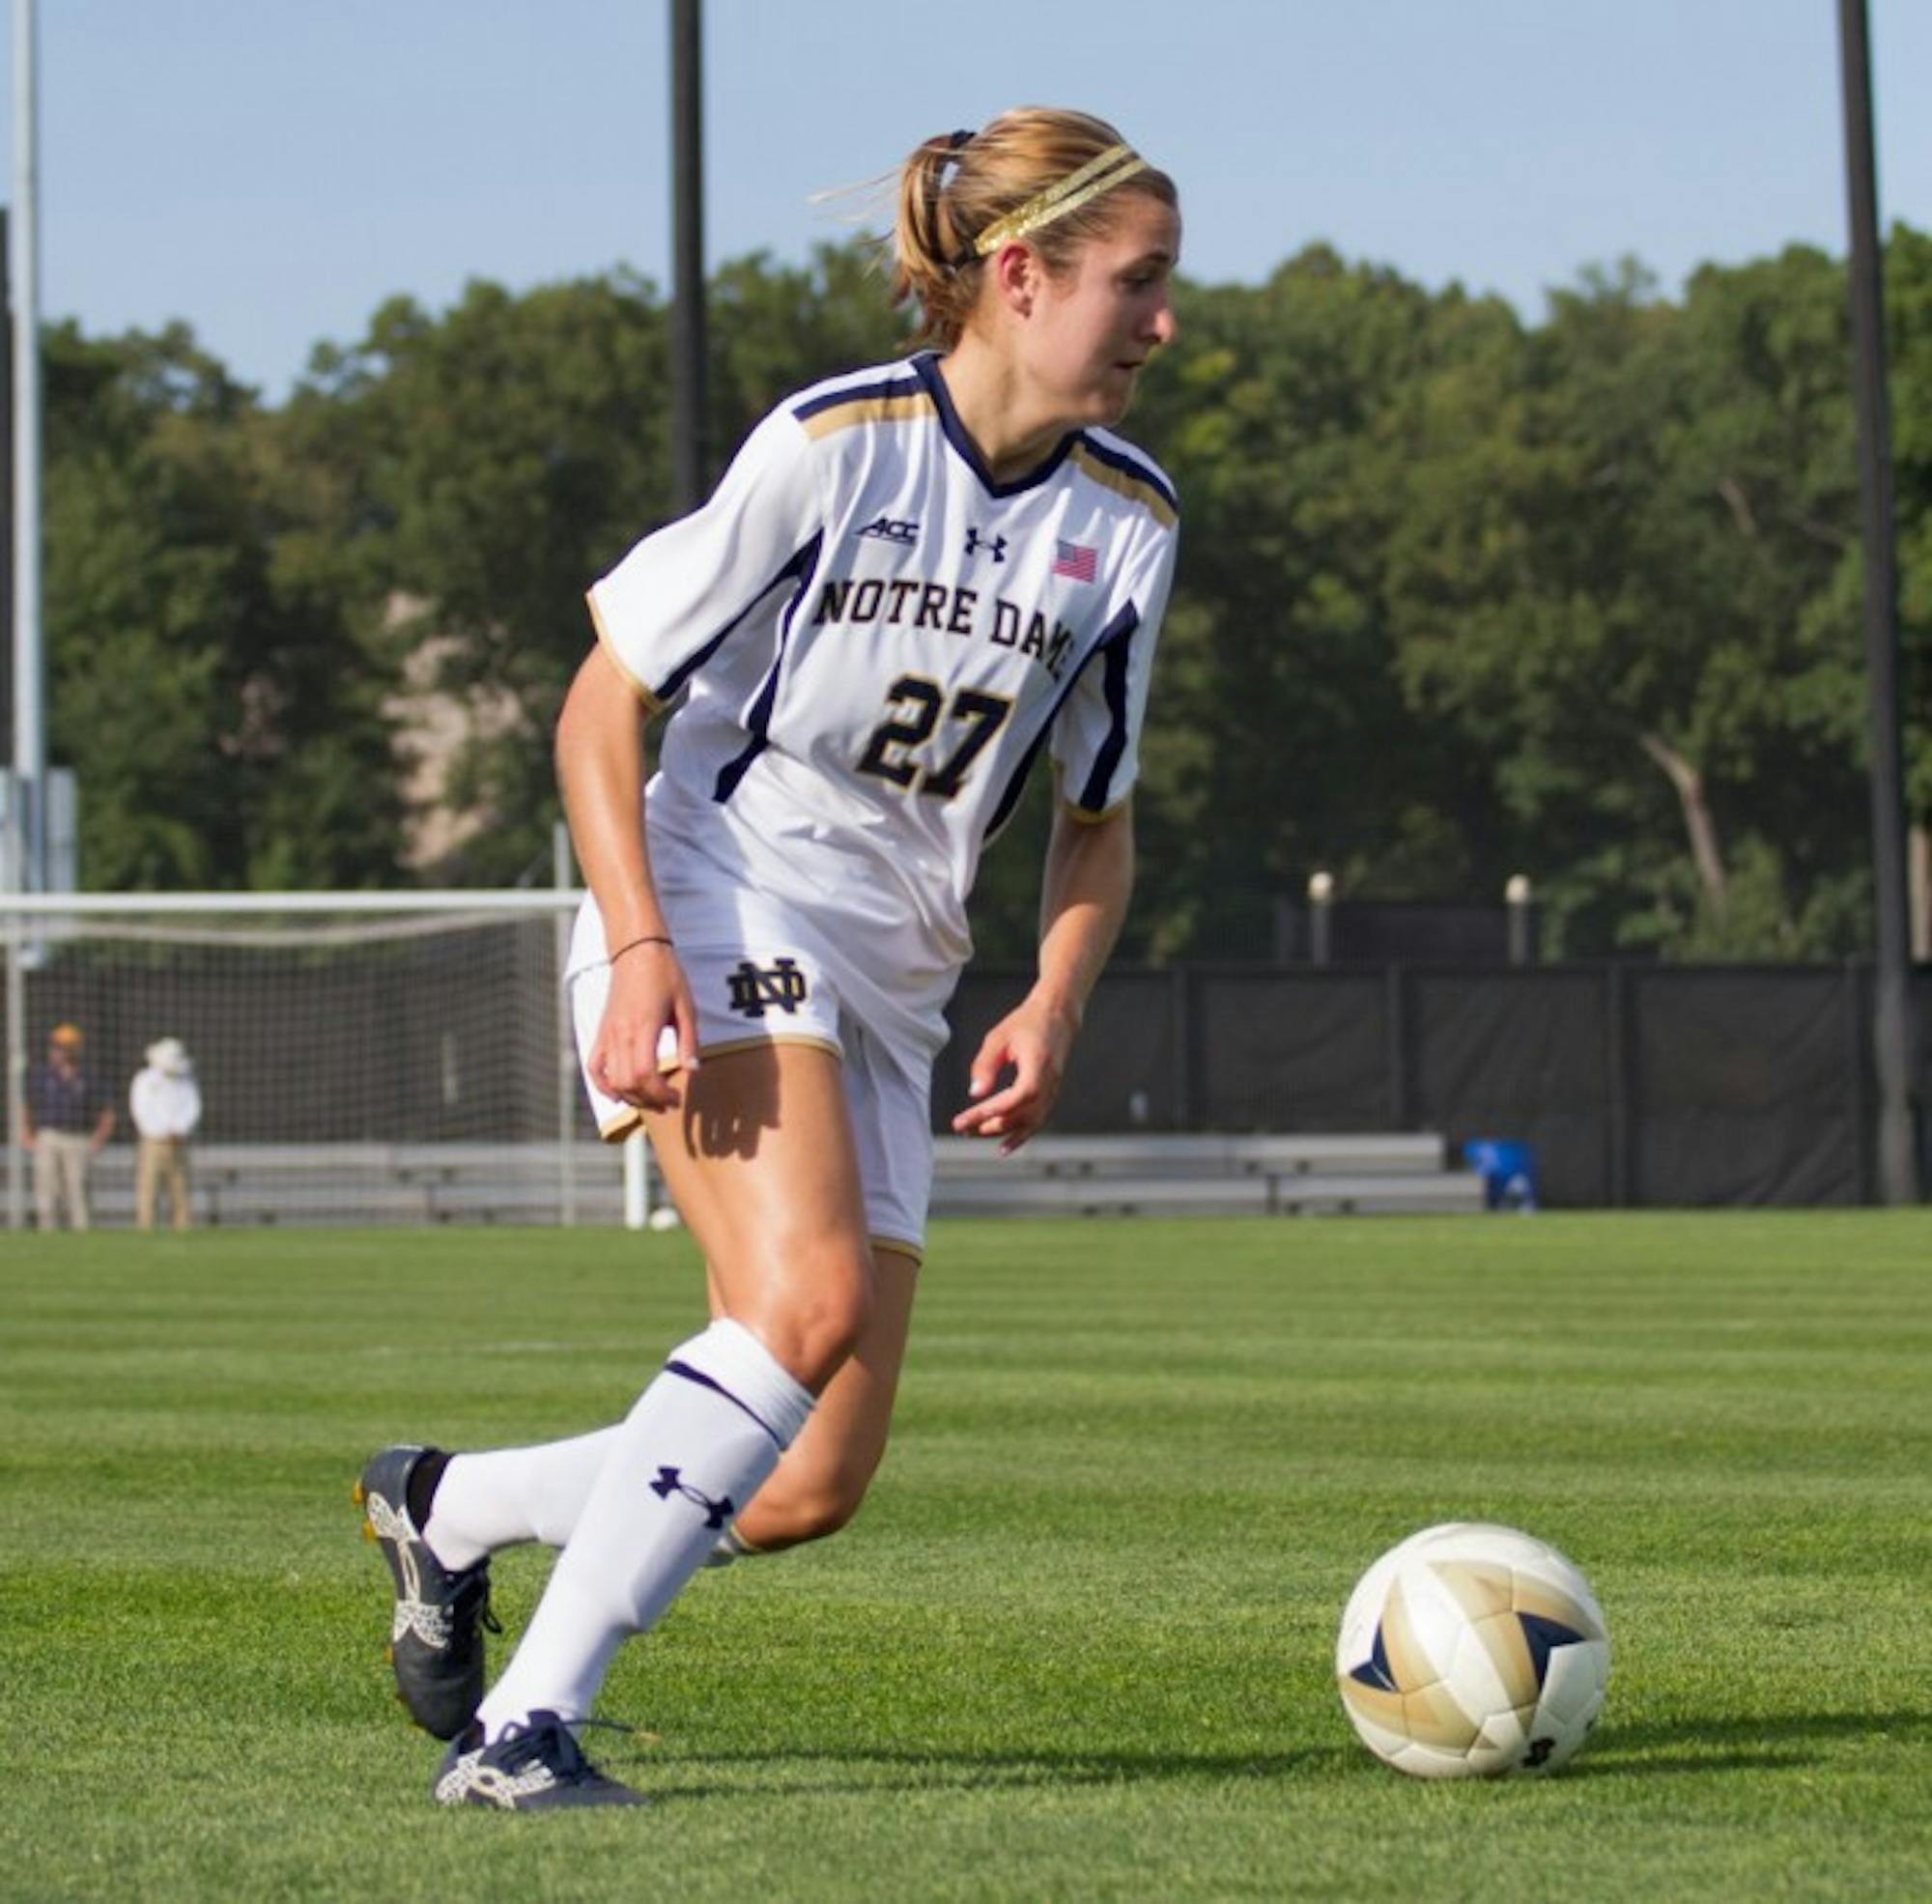 Irish senior forward and captain Kaleigh Olmsted looks to pass during Notre Dame’s 1-0 win over Missouri on Sept. 4 at Alumni Stadium.